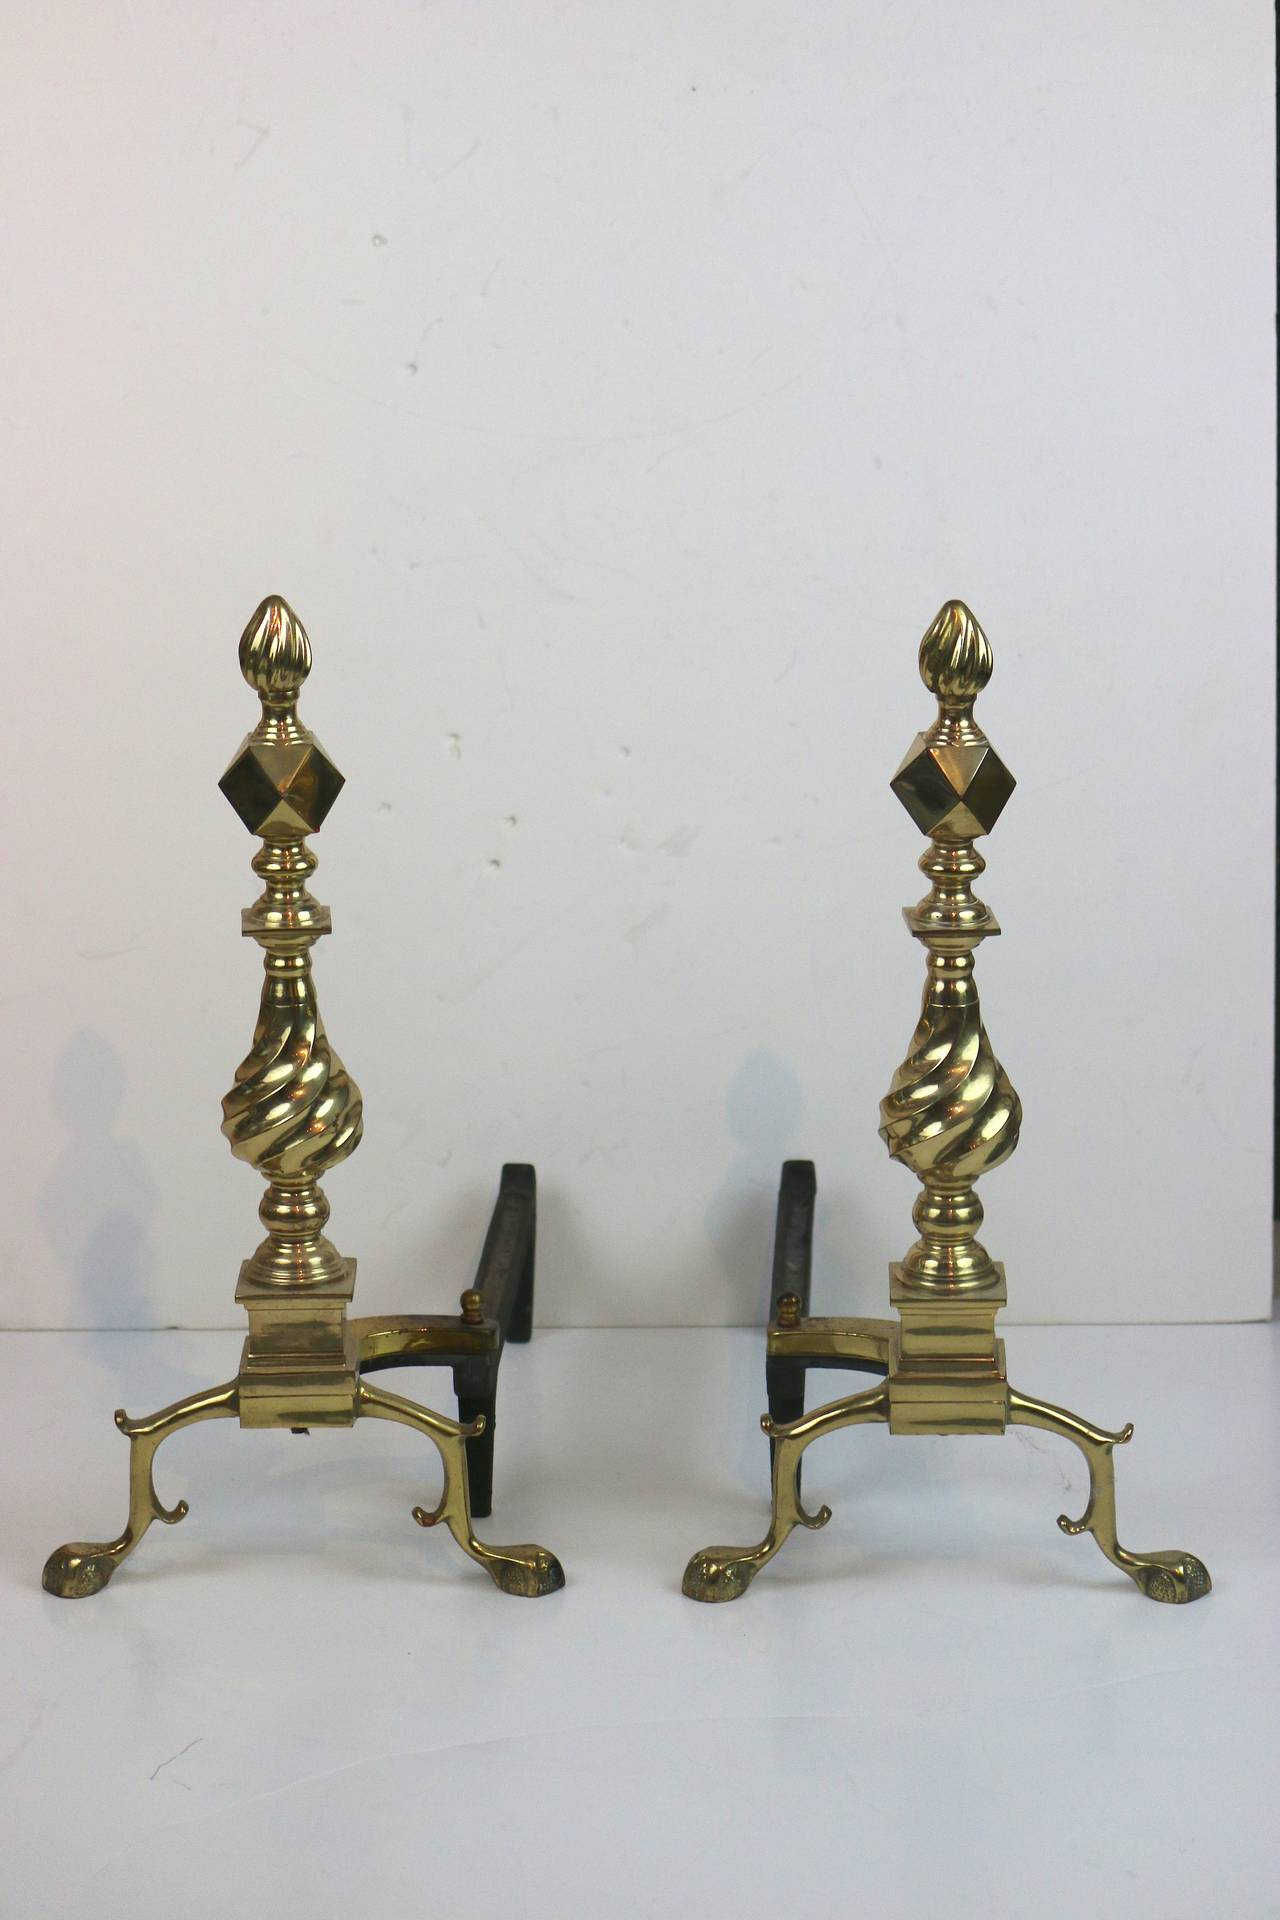 A Pair of Federal Style Polished Brass Andirons, Diamond Center Top and curvilinear brass detail stem, each one raised on ball and claw feet.
19 1/2